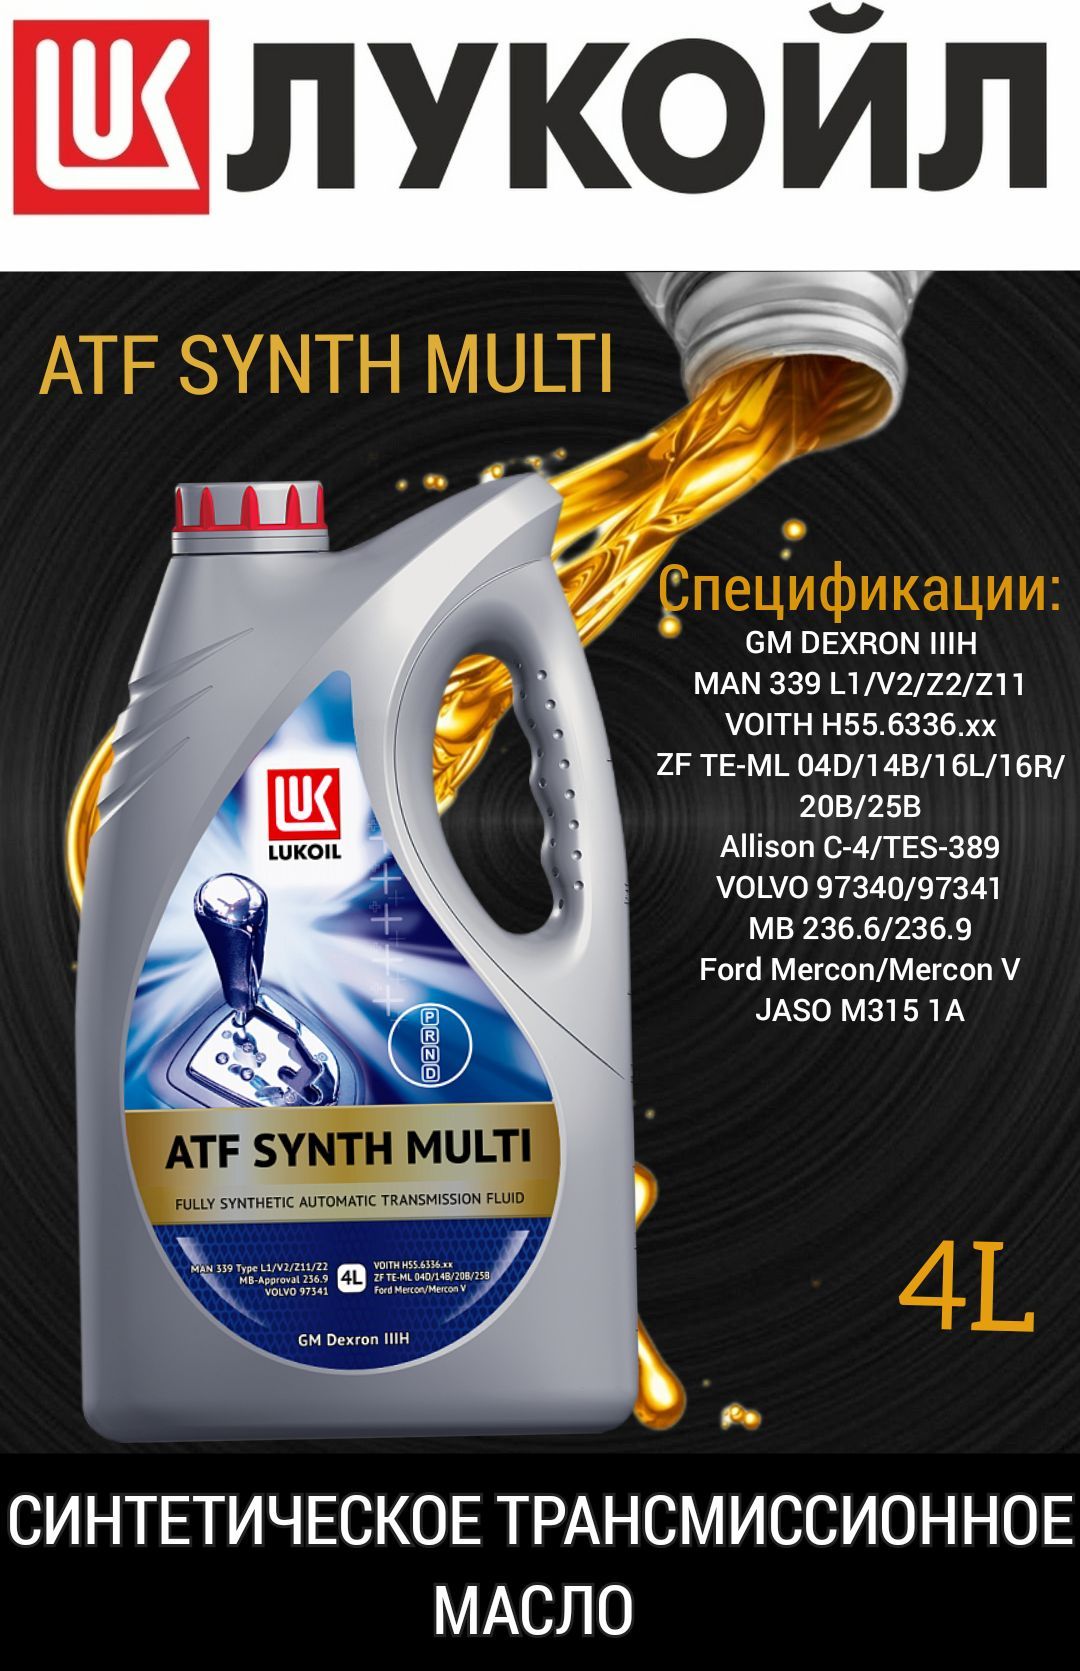 Atf synth vi. Лукойл ATF Synth Multi 4л. Лукойл ATF Synth vi (20l). Lukoil ATF Synth Asia в Вольво. Lukoil ATF Synth m 15.